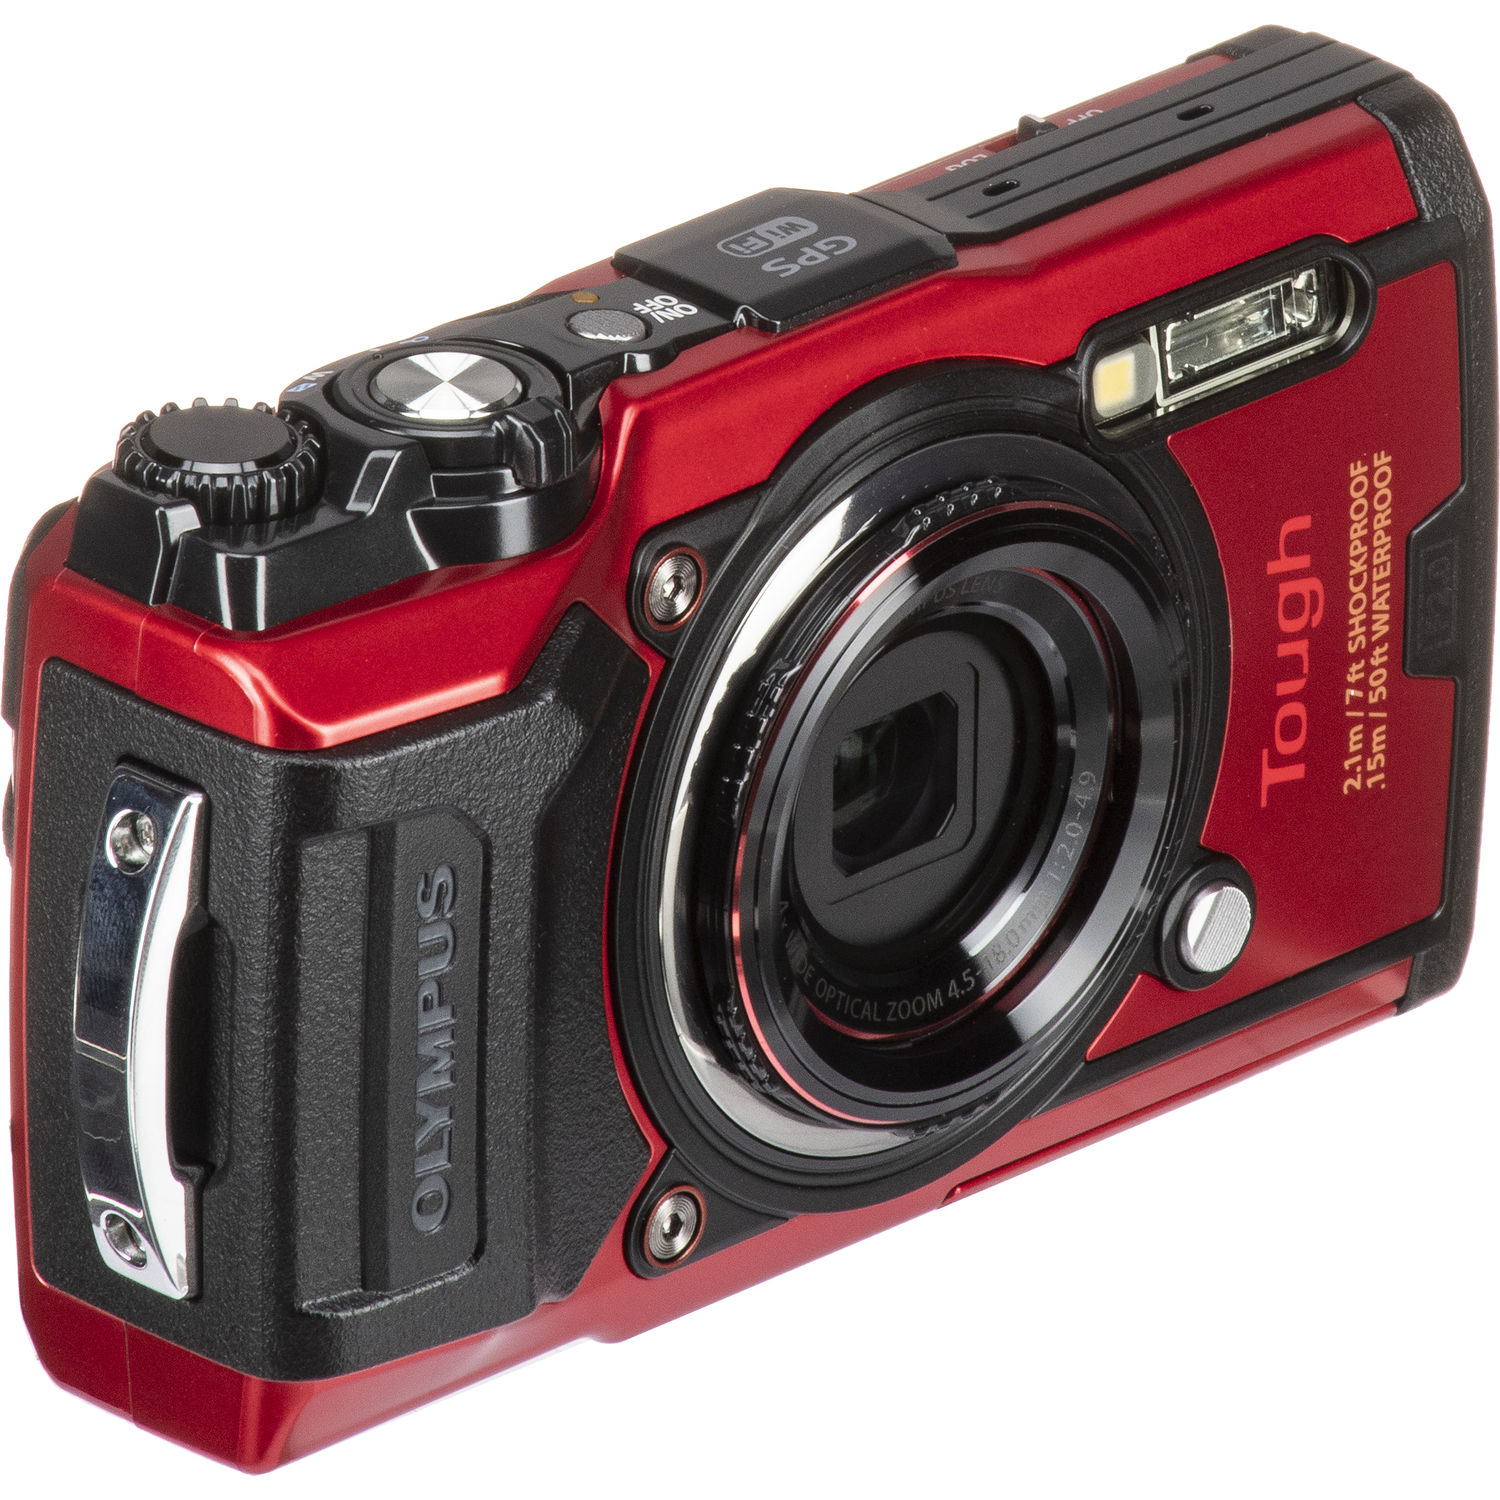 Olympus Tough TG-6 Compact Camera - Red - image 2 of 5